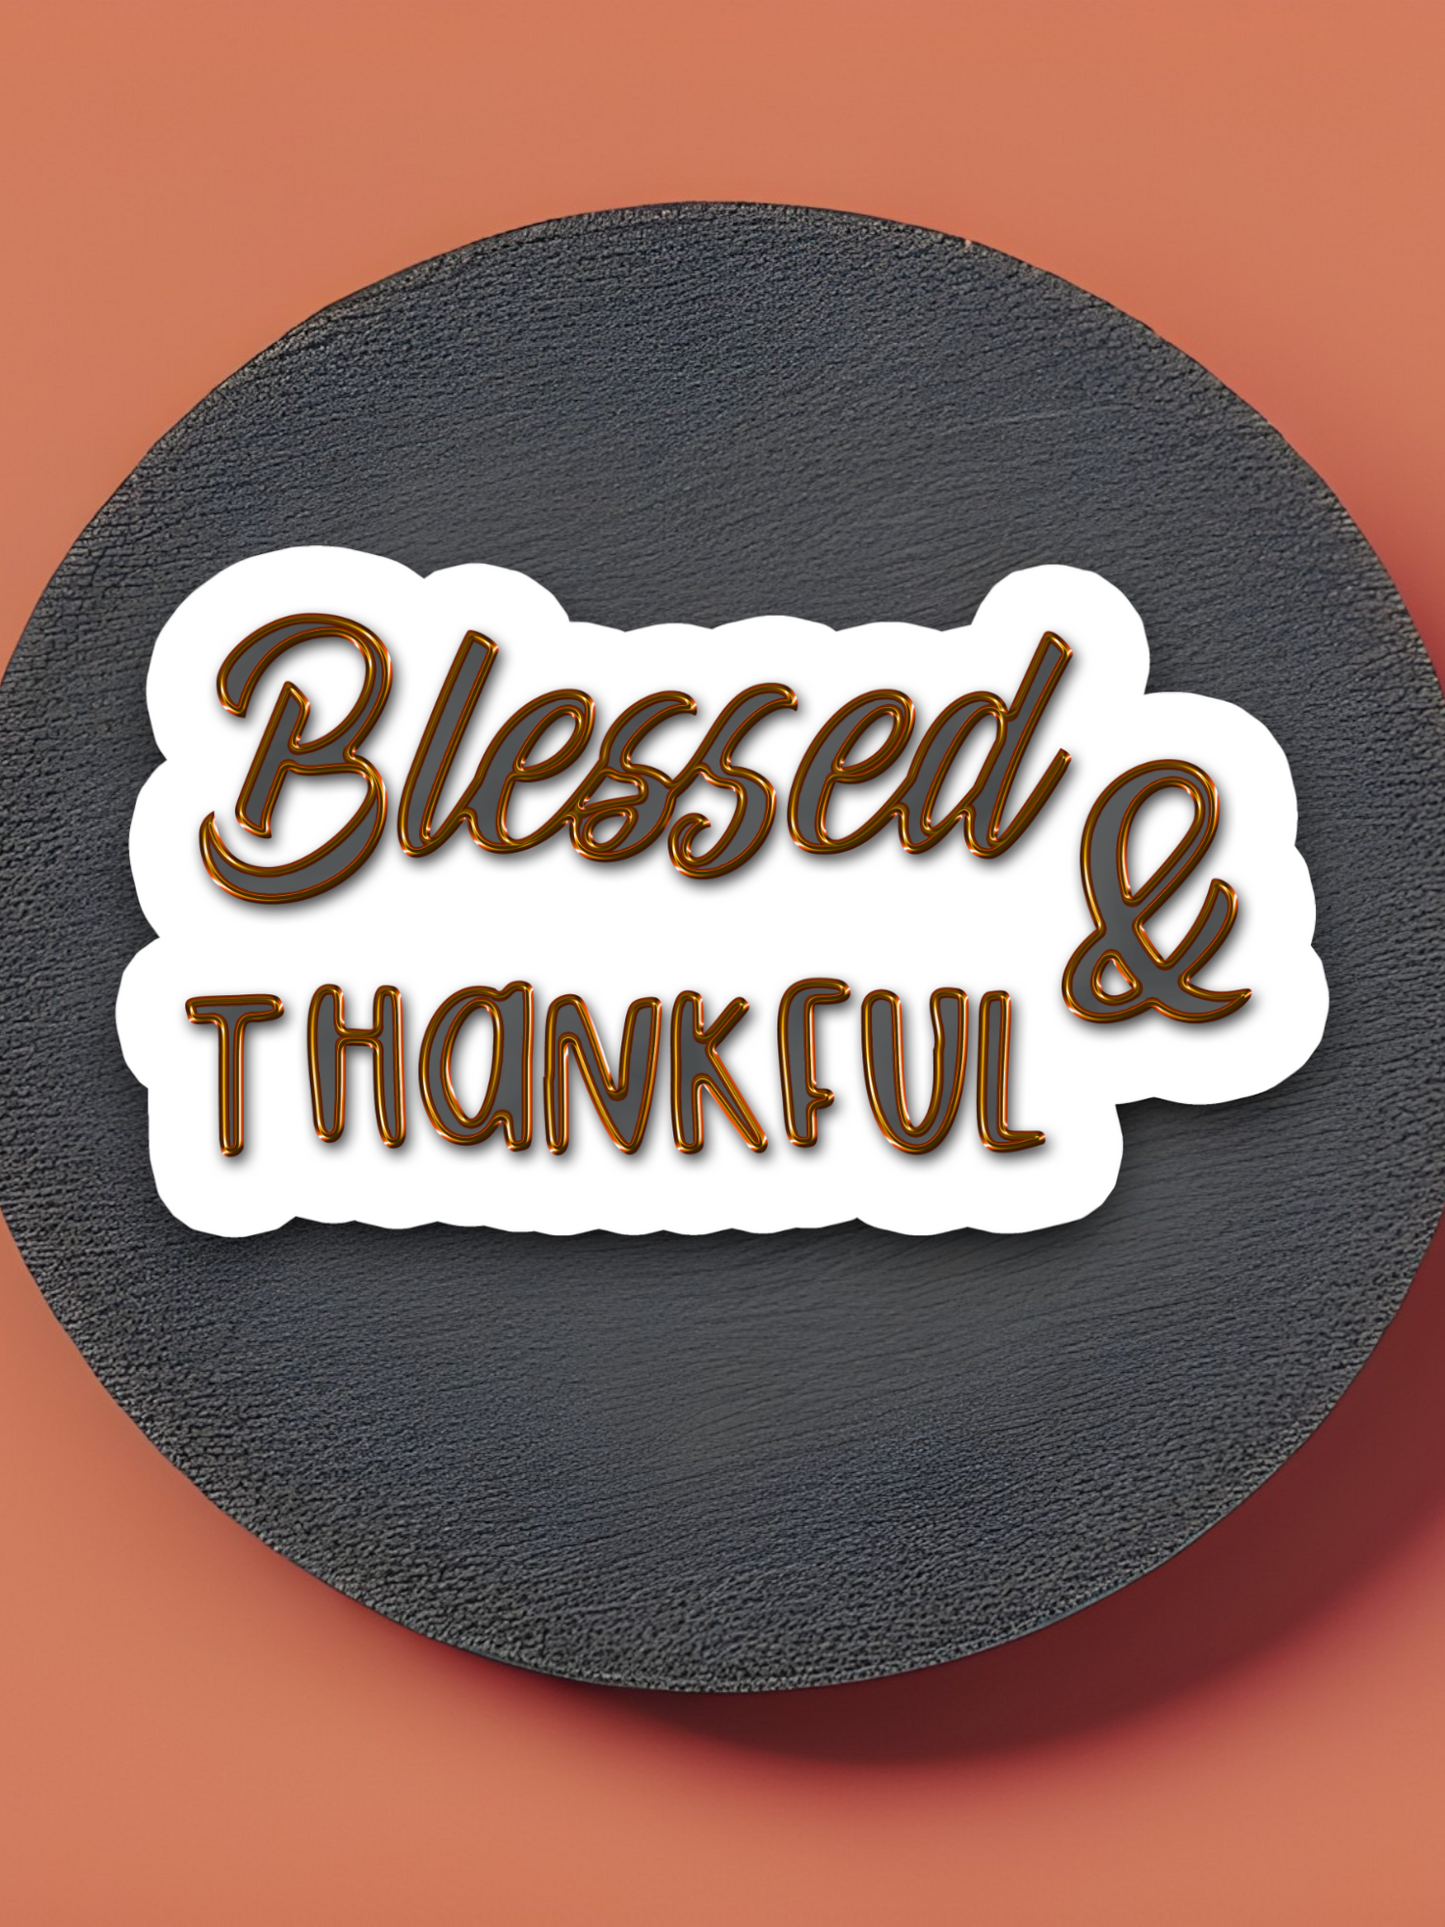 Blessed and Thankful - Version 02 - Faith Sticker